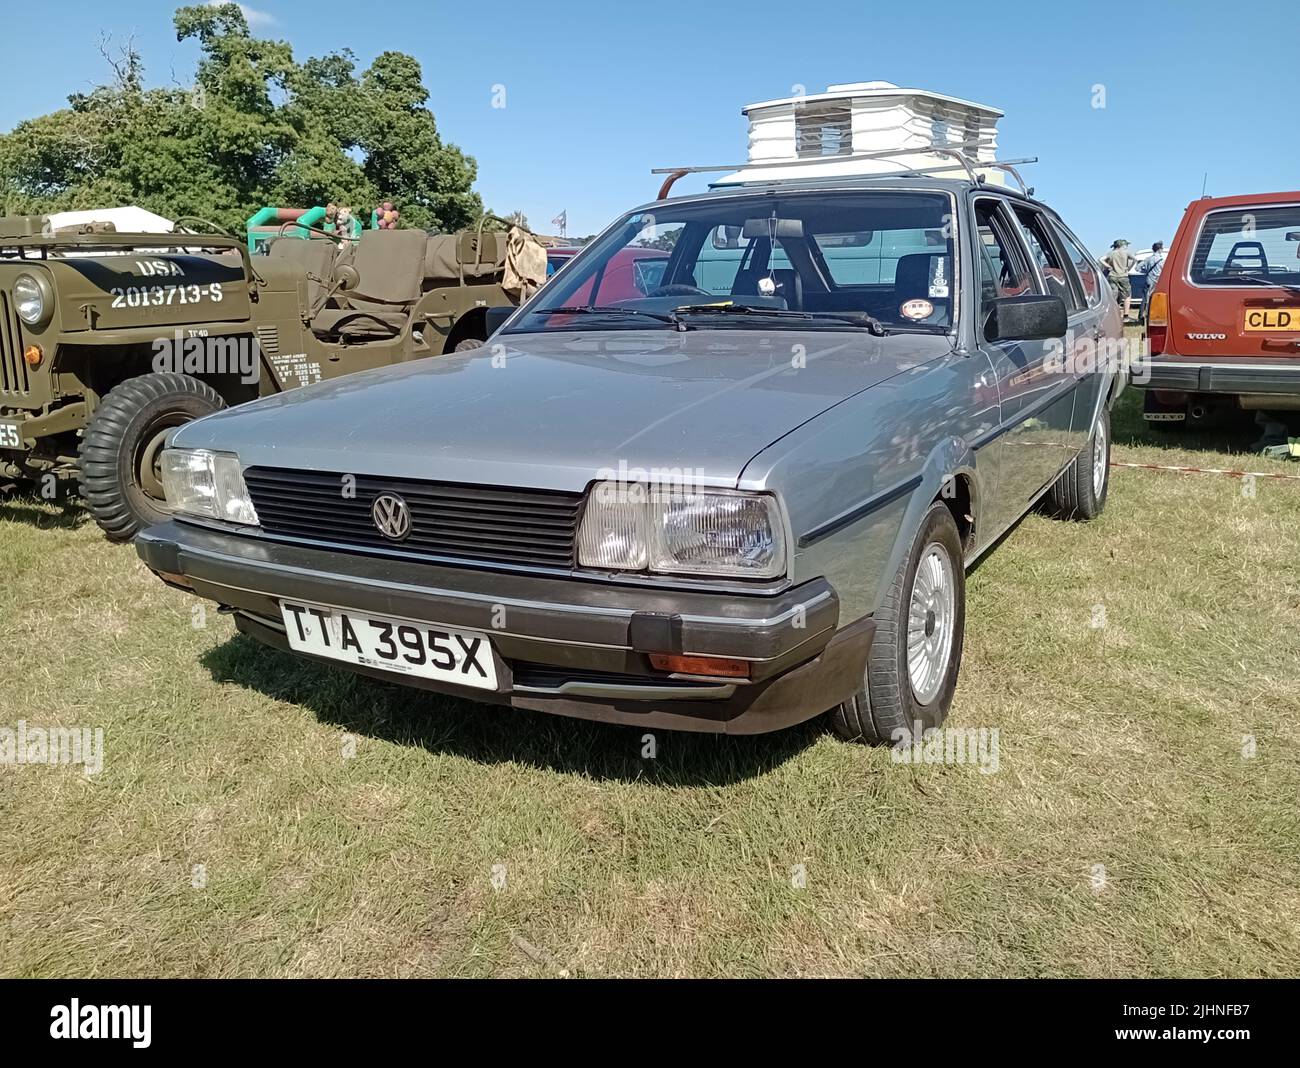 A 1981 Volkswagen Passat GL5 parked on display at the 47th Historic Vehicle Gathering classic car show, Powderham, Devon, England, UK. Stock Photo